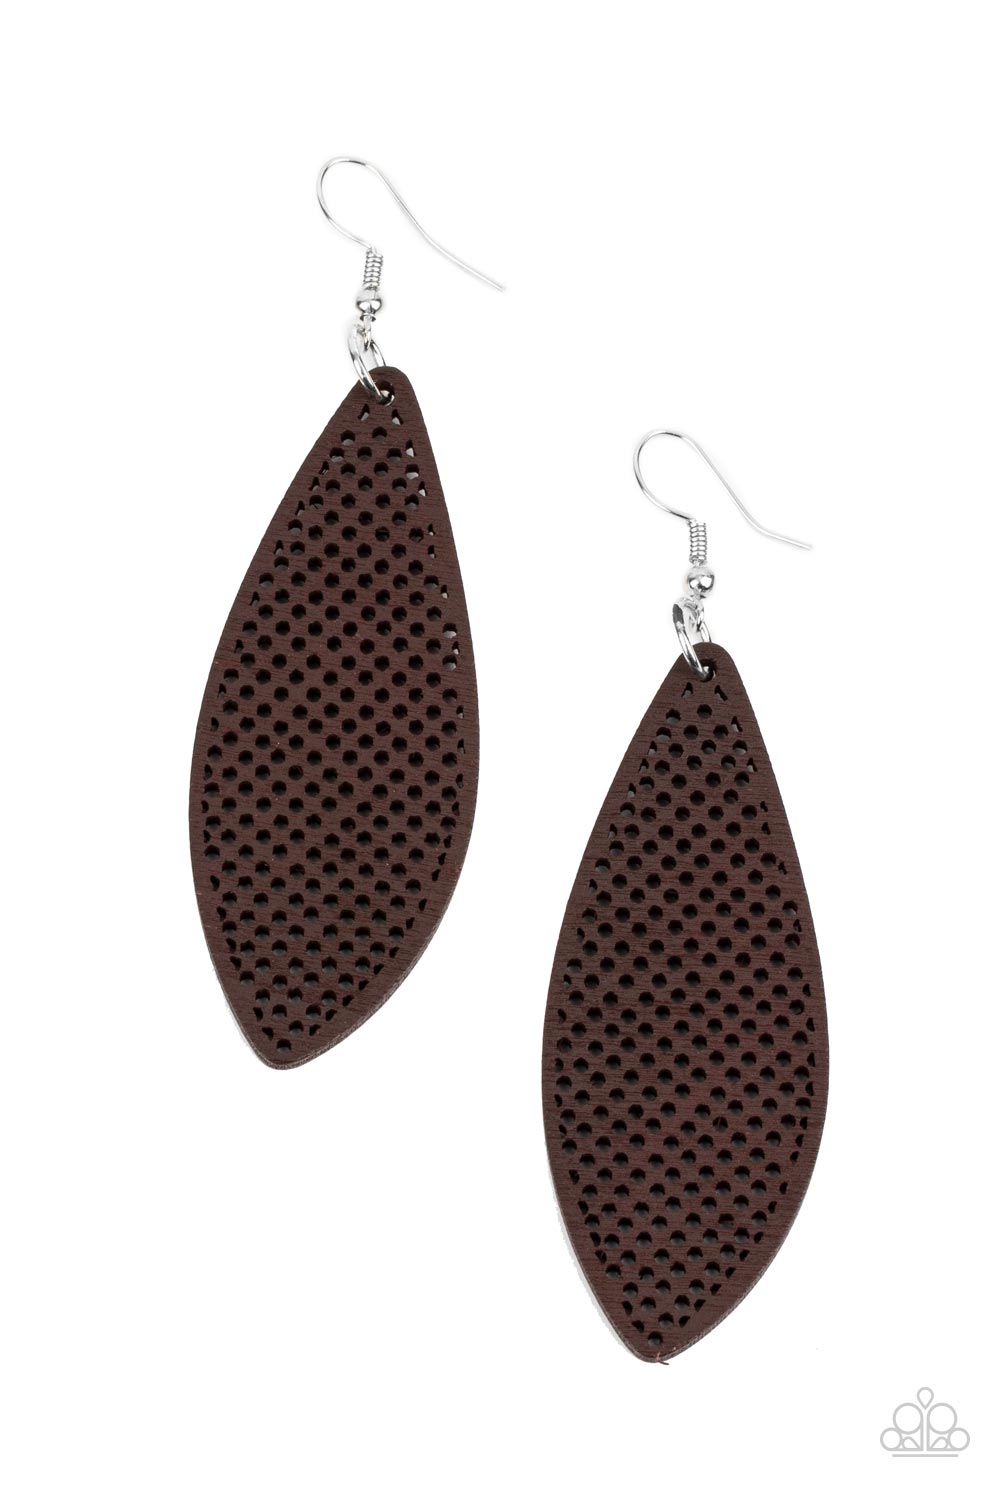 Paparazzi Accessories Surf Scene - Brown Wood Earrings - Lady T Accessories